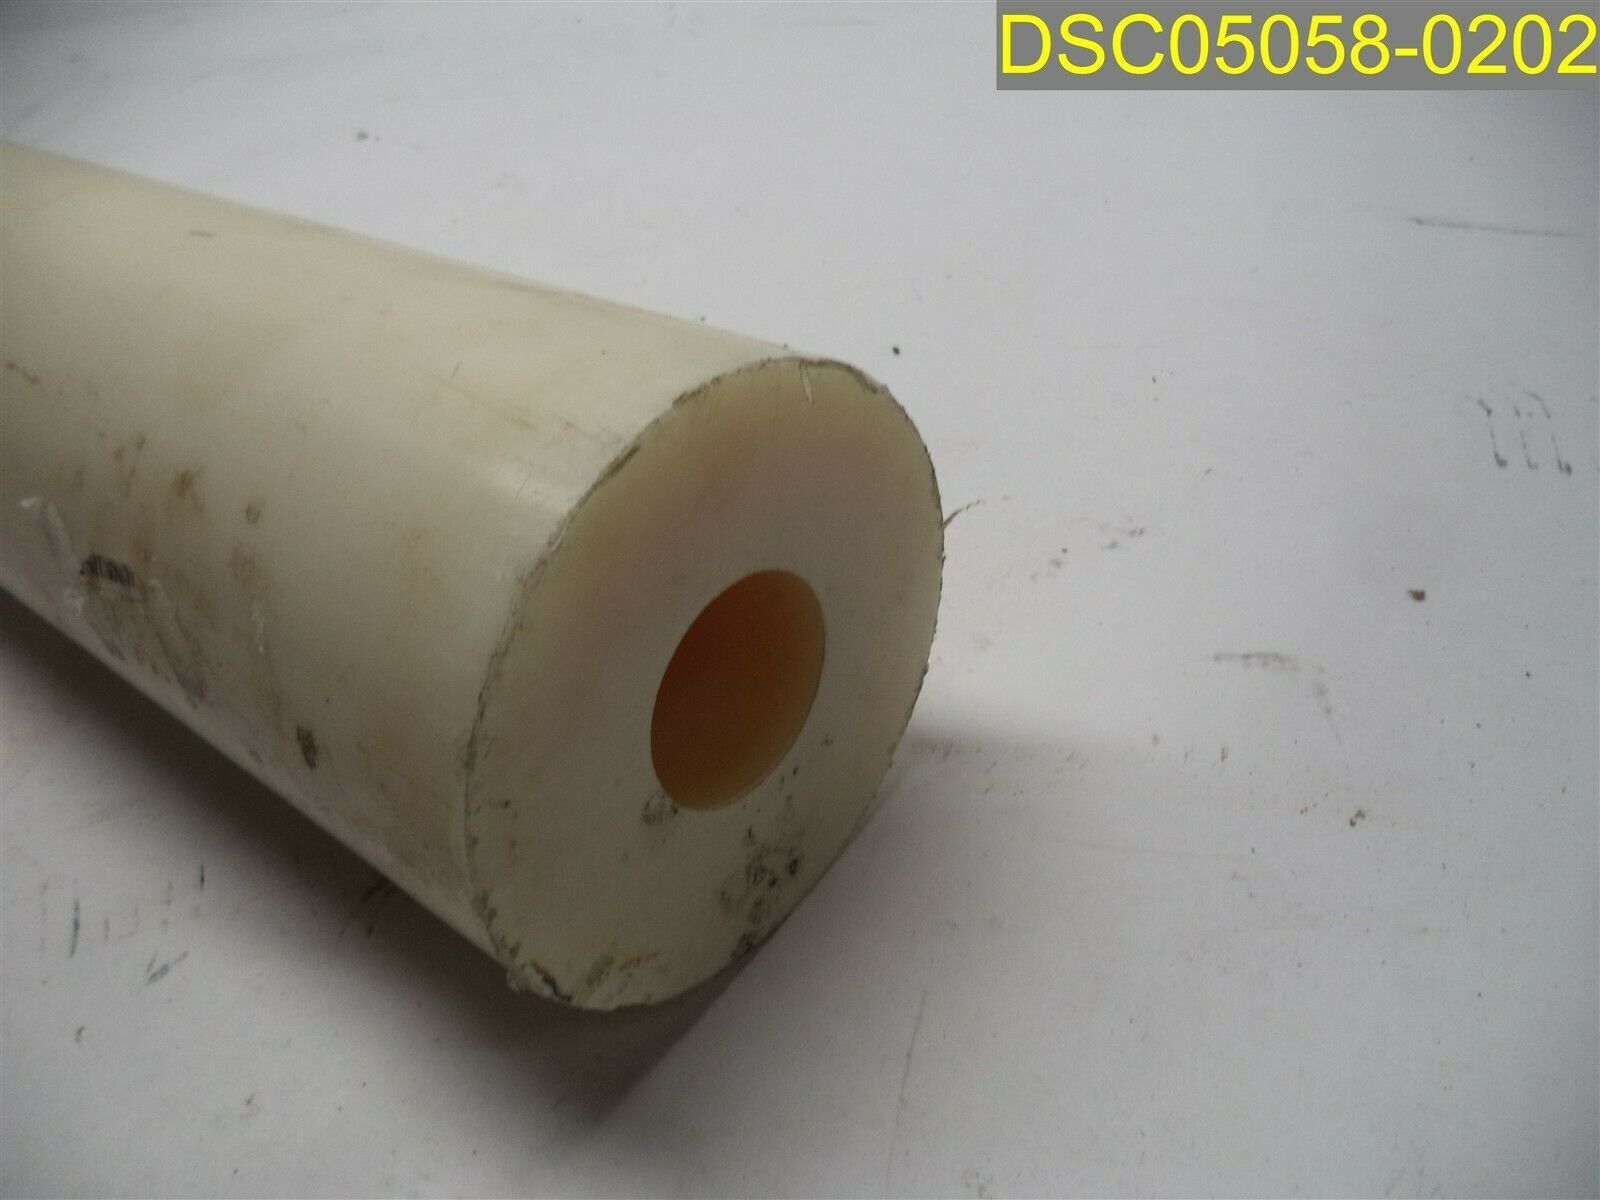 Thick Wall Poly Tube Round Rod: 4" Od, 1 1/2" Id, 53 11/16" Length